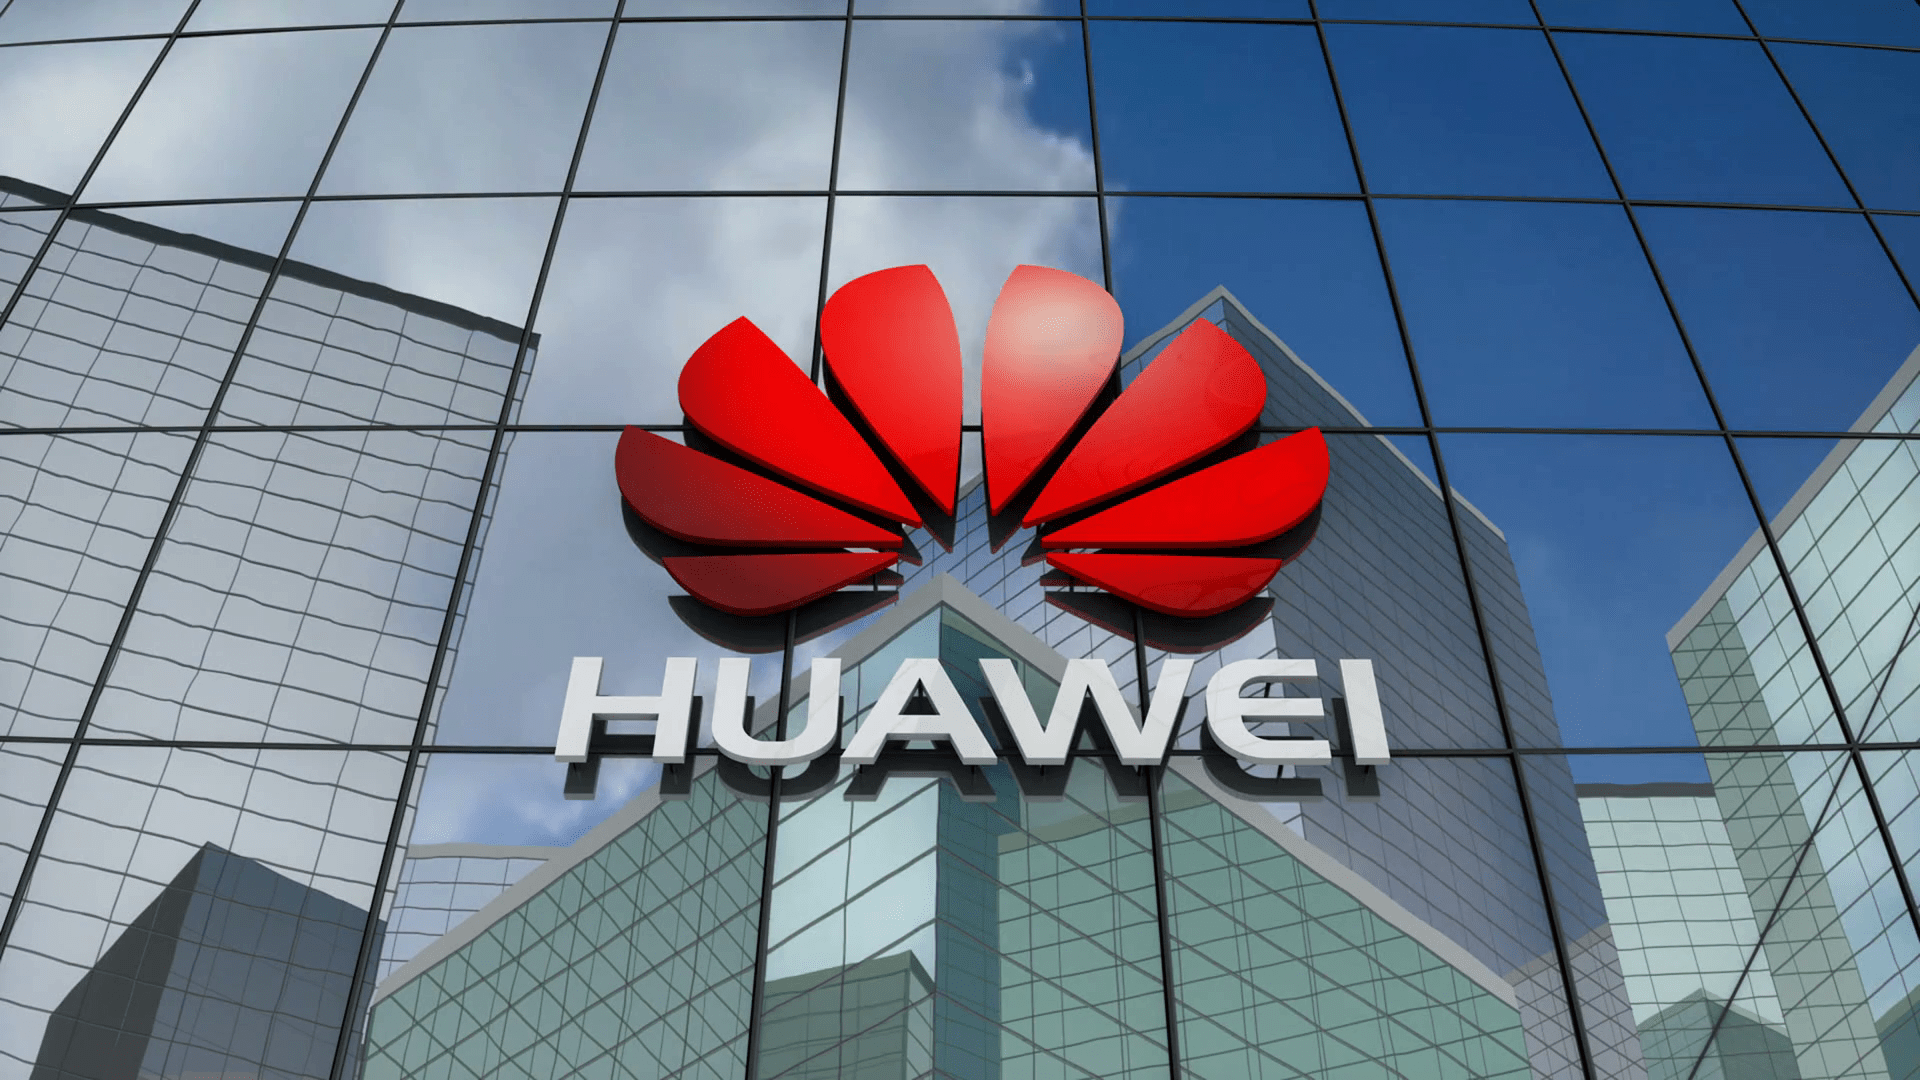 https://www.tecnoandroid.it/wp-content/uploads/2020/05/Huawei-1-3.png